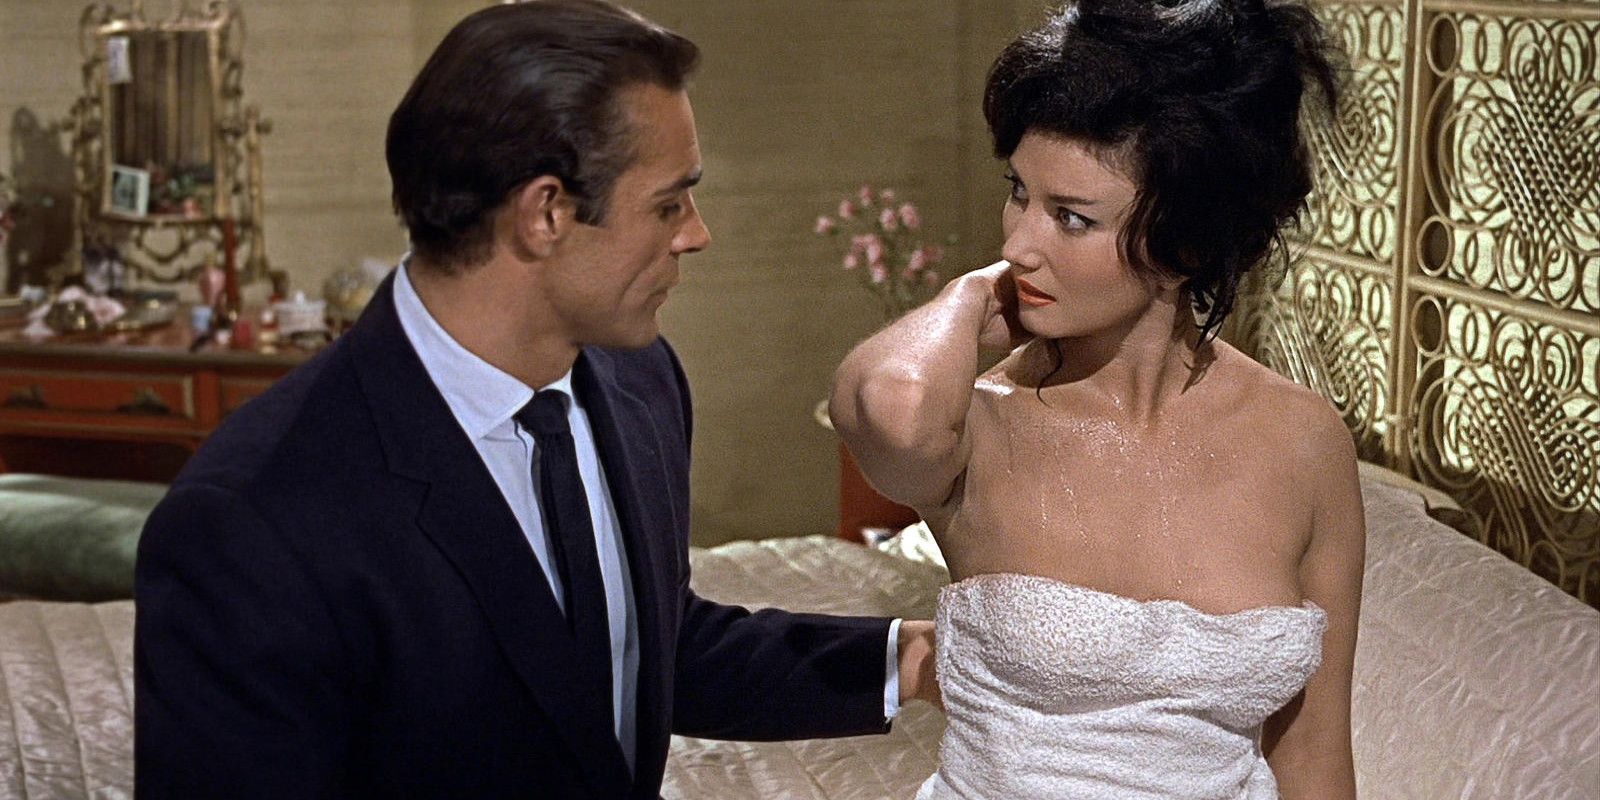 Miss Taro in a towel talks to James Bond on the bed in Dr. No.